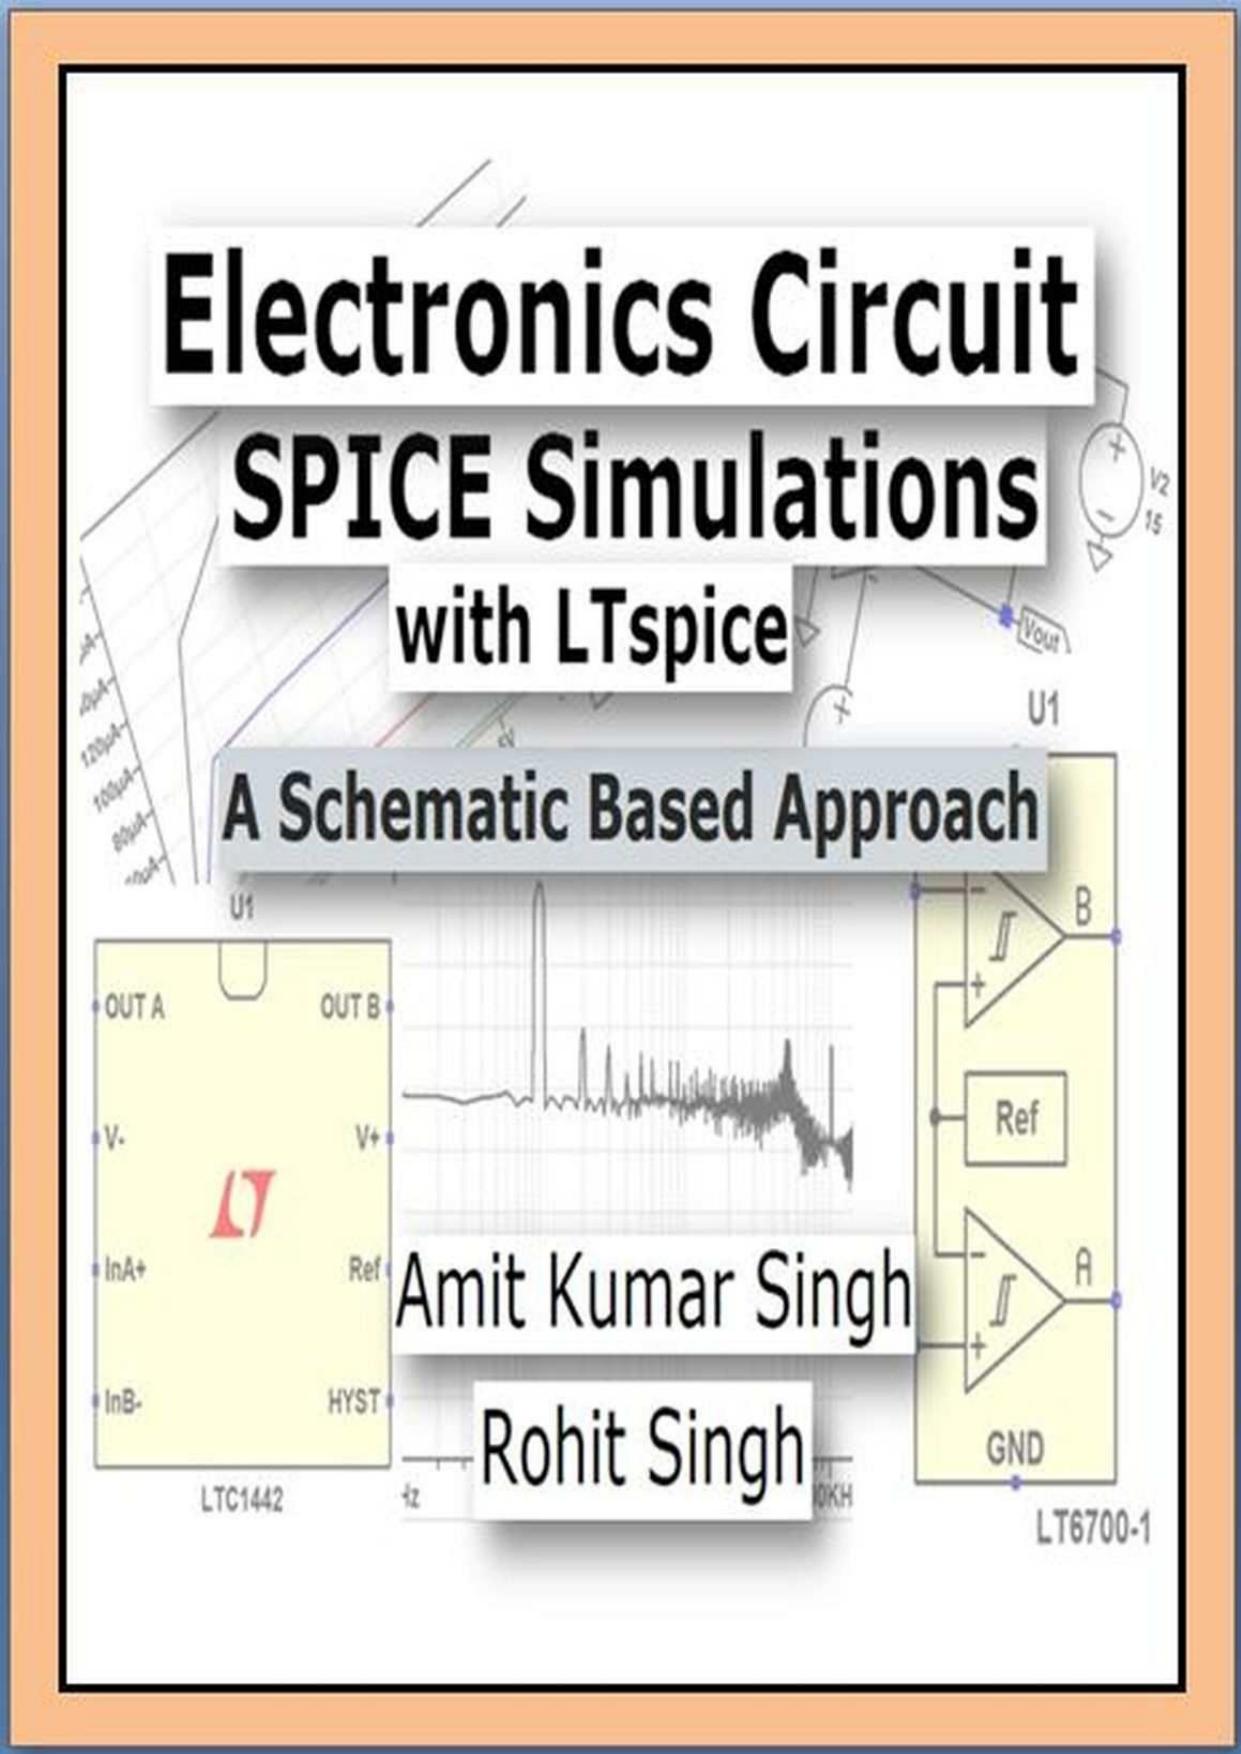 Electronics Circuit SPICE Simulations with LTspice: A Schematic Based Approach (Beginner Book 1) by Amit Kumar Singh & Rohit Singh